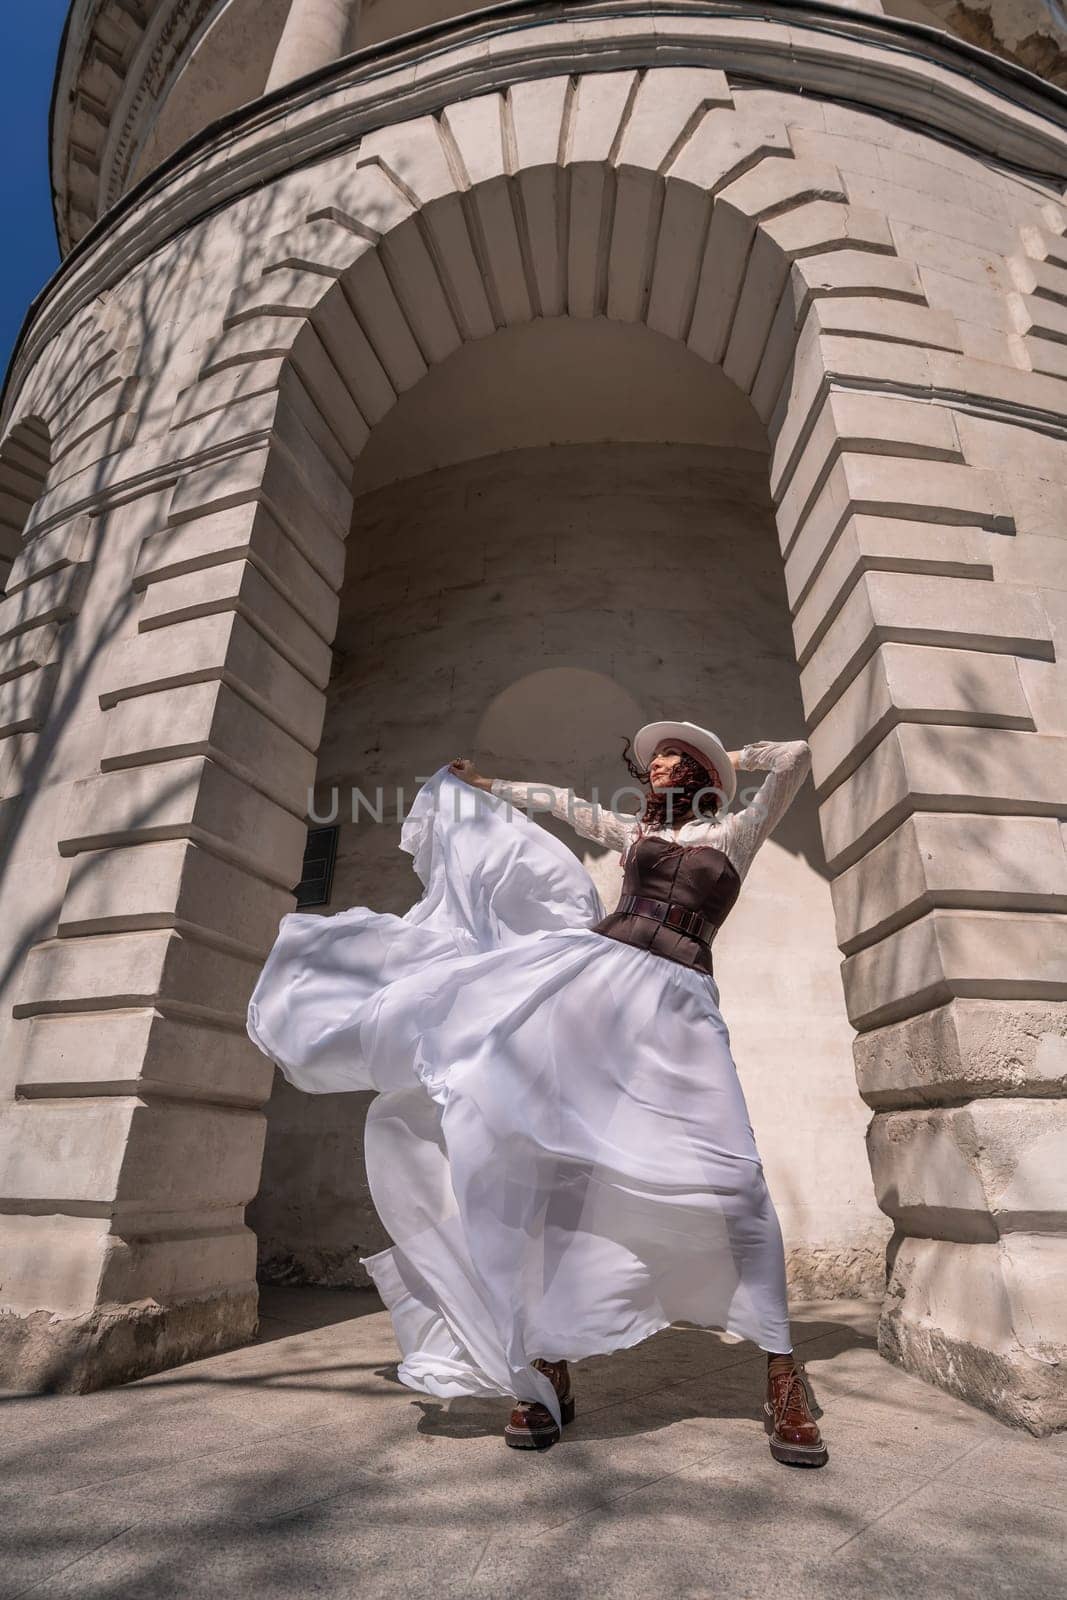 Stylish woman building city. A dancer in a long white skirt dances in front of a building with an arch. The skirt develops in the wind. by Matiunina